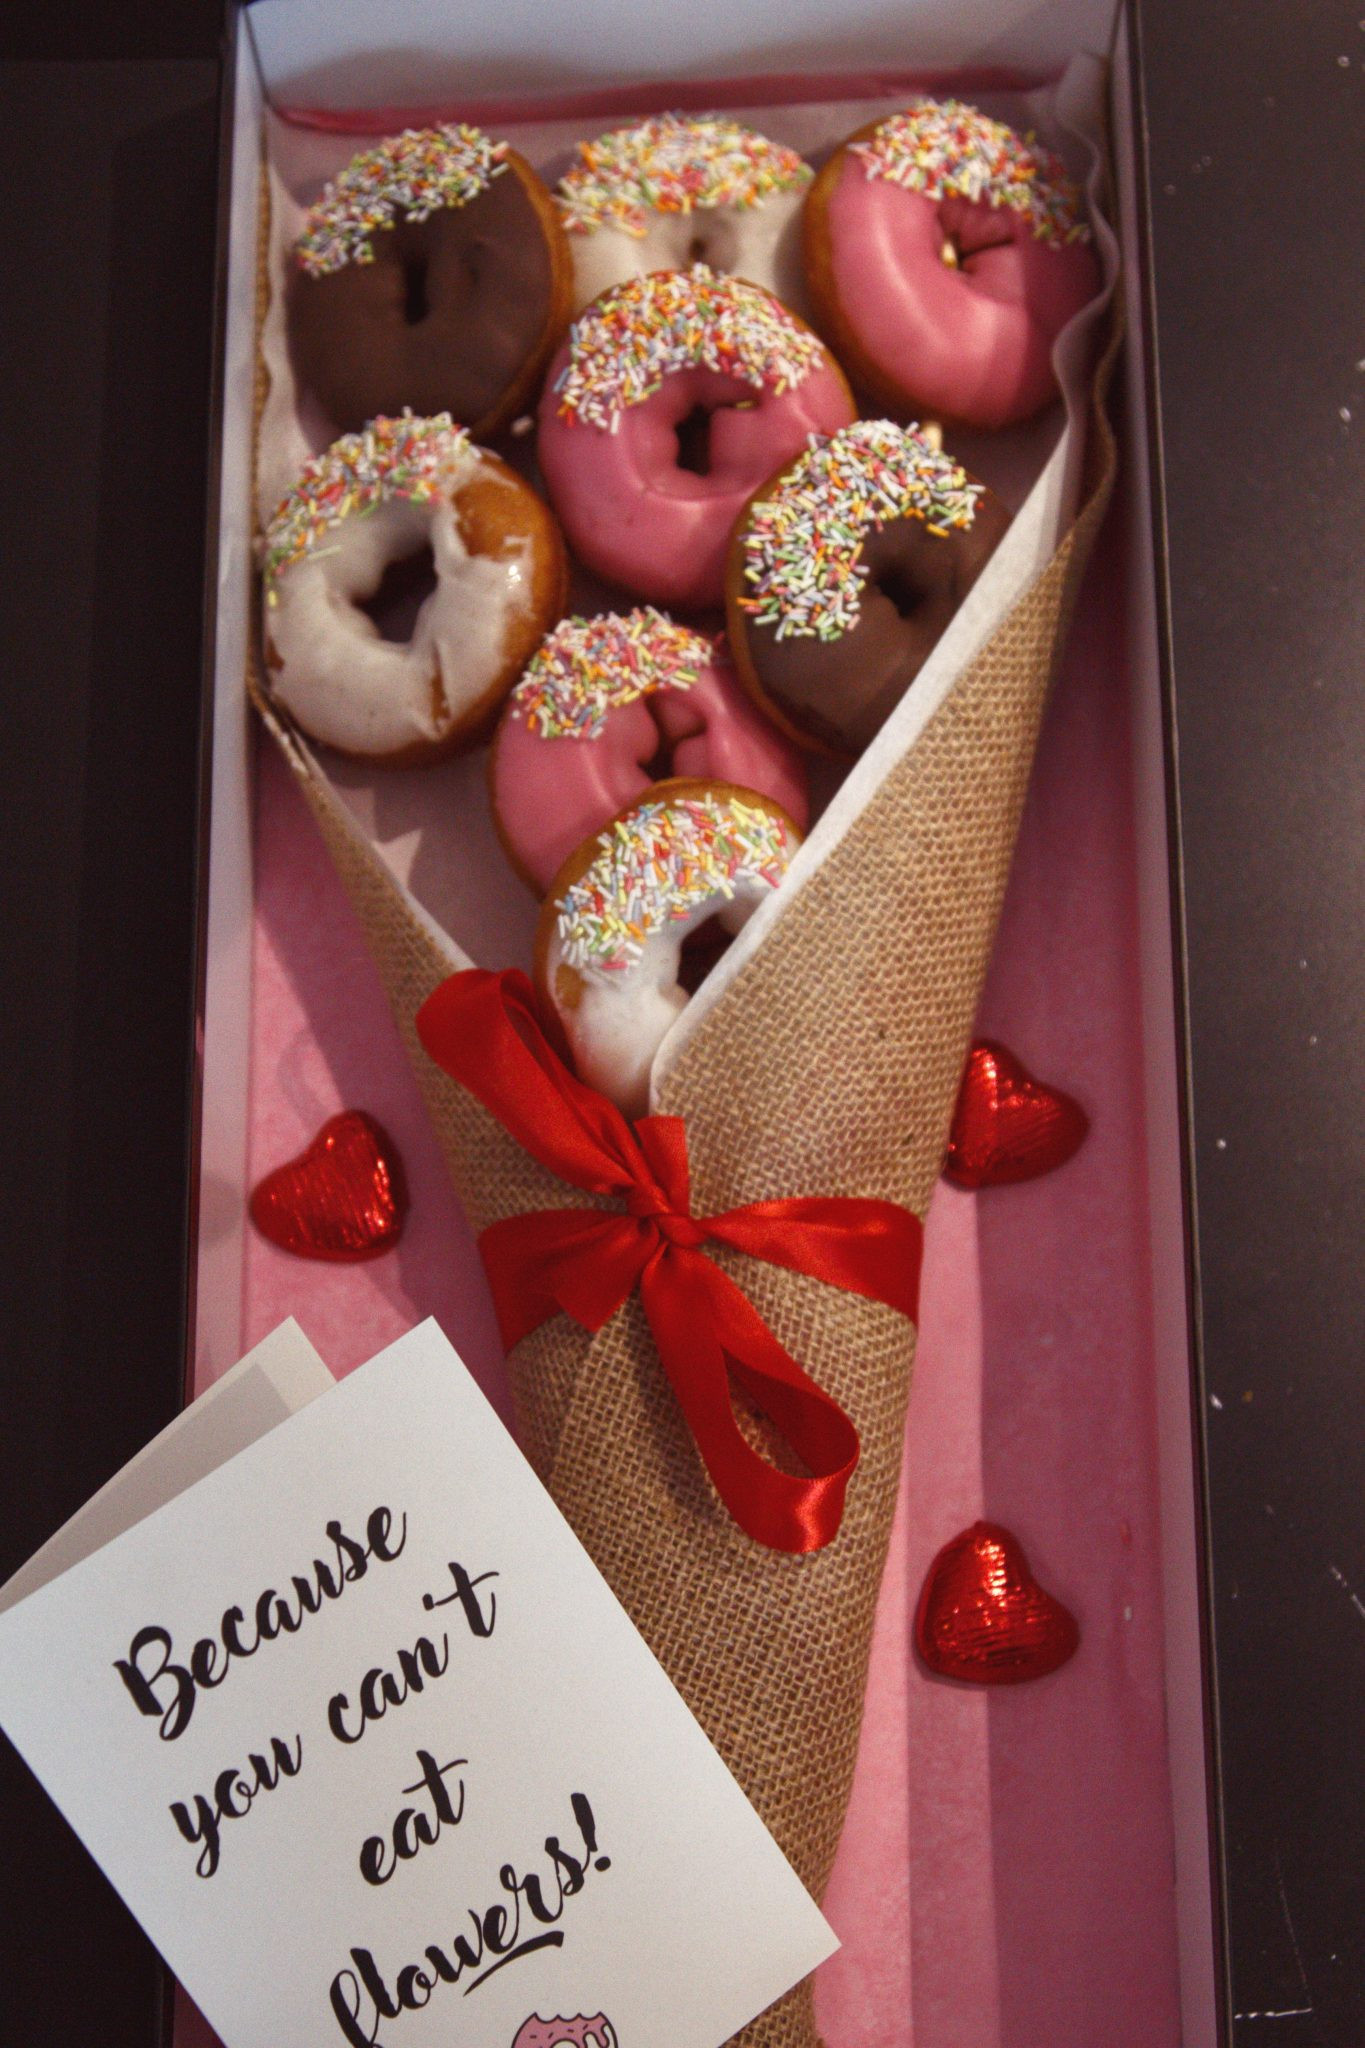 Birthday Gifts Delivered
 For flowers it’s all about donut bouquets